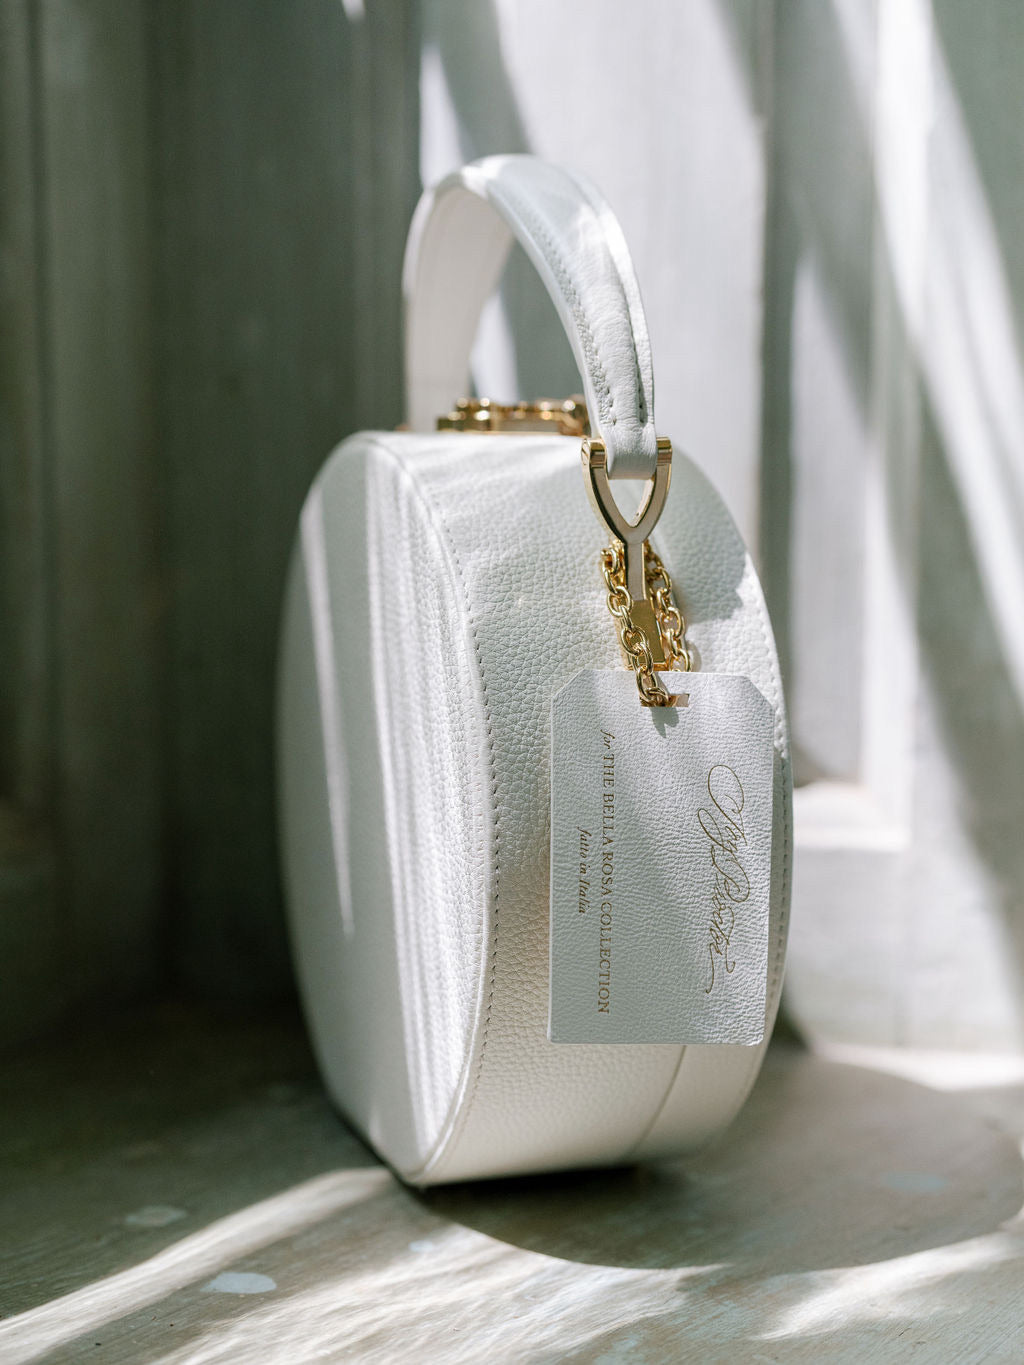 An elegant white designer handbag with a gold chain detail, placed against a light-dappled backdrop.